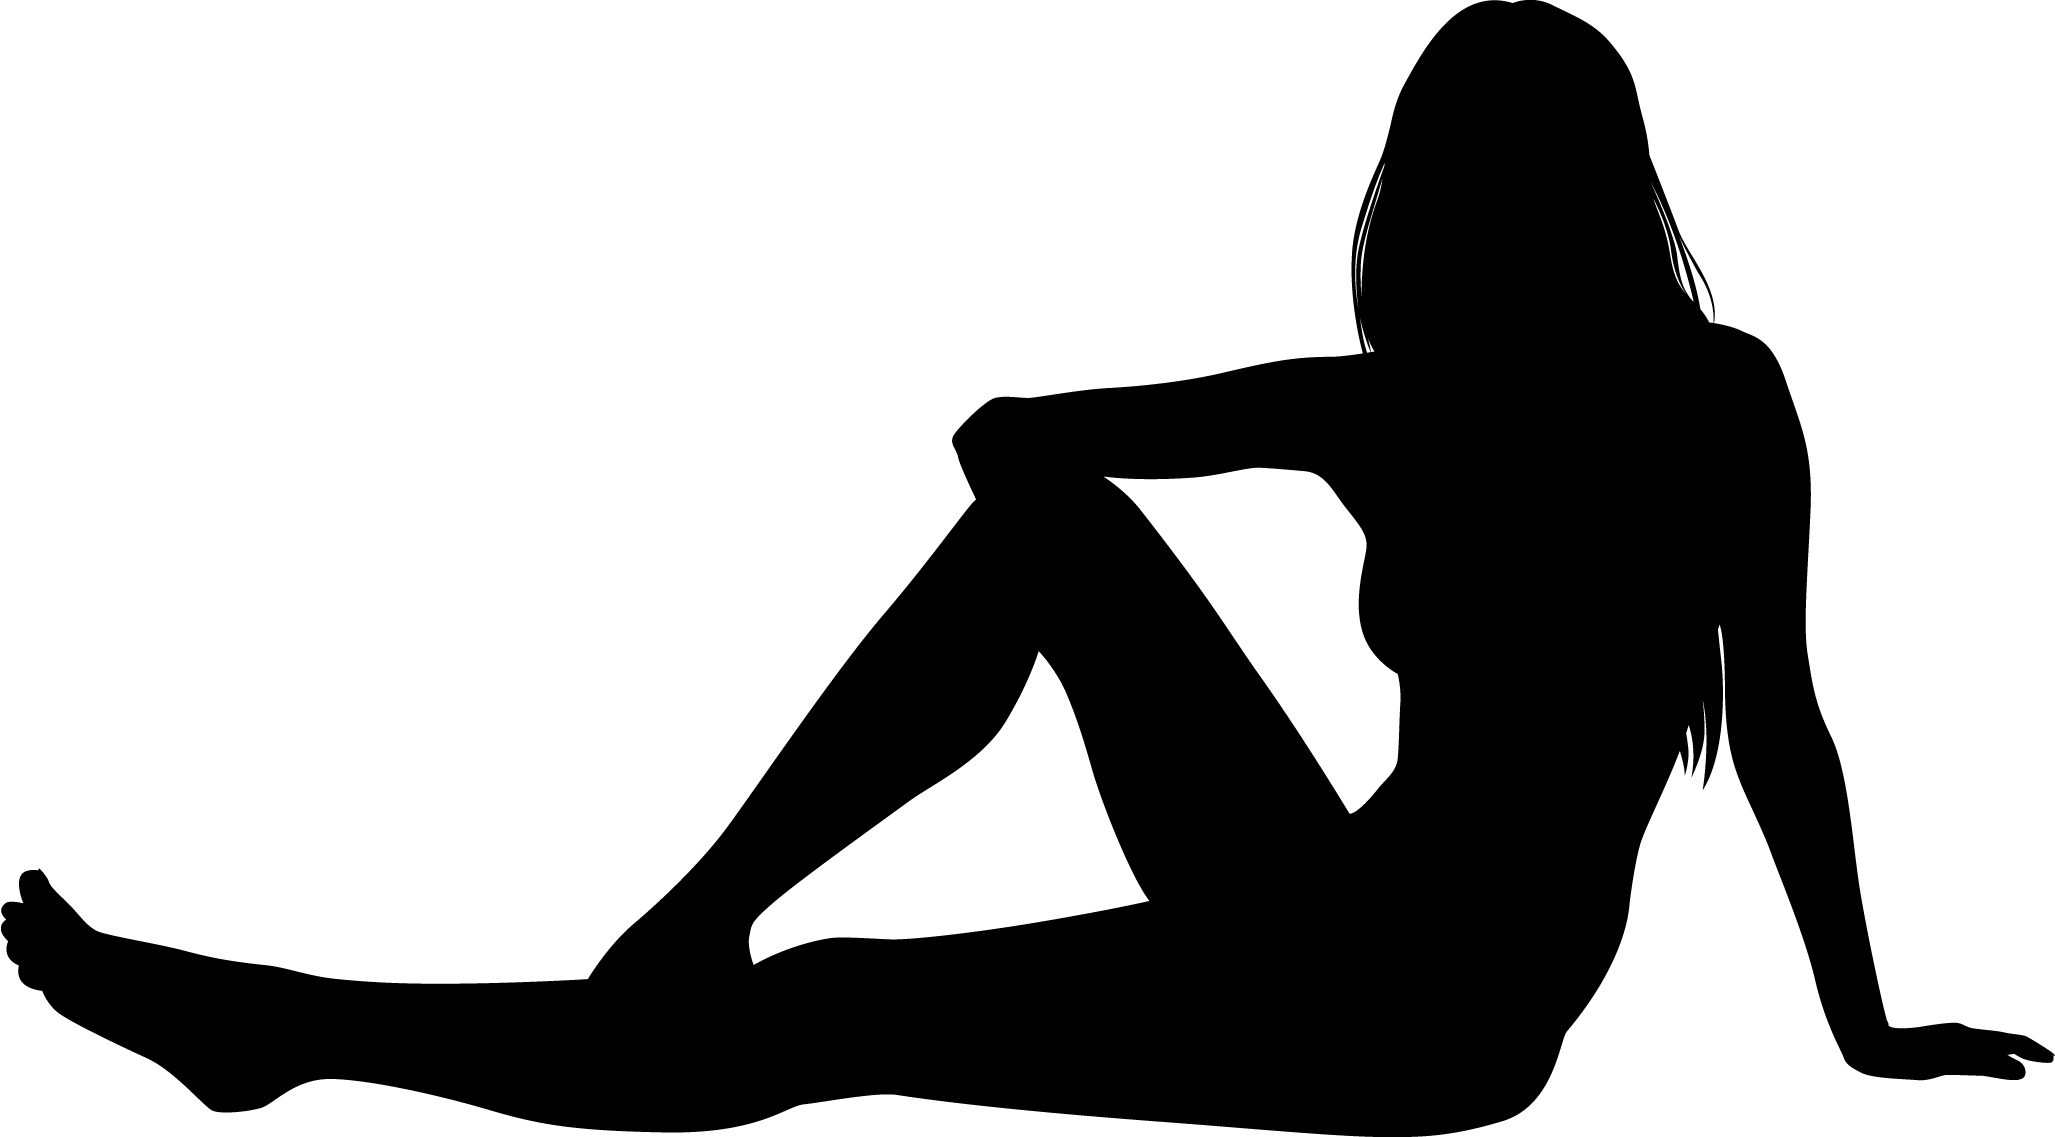 Clip Arts Related To : vector vintage woman silhouette. view all Girl Silho...